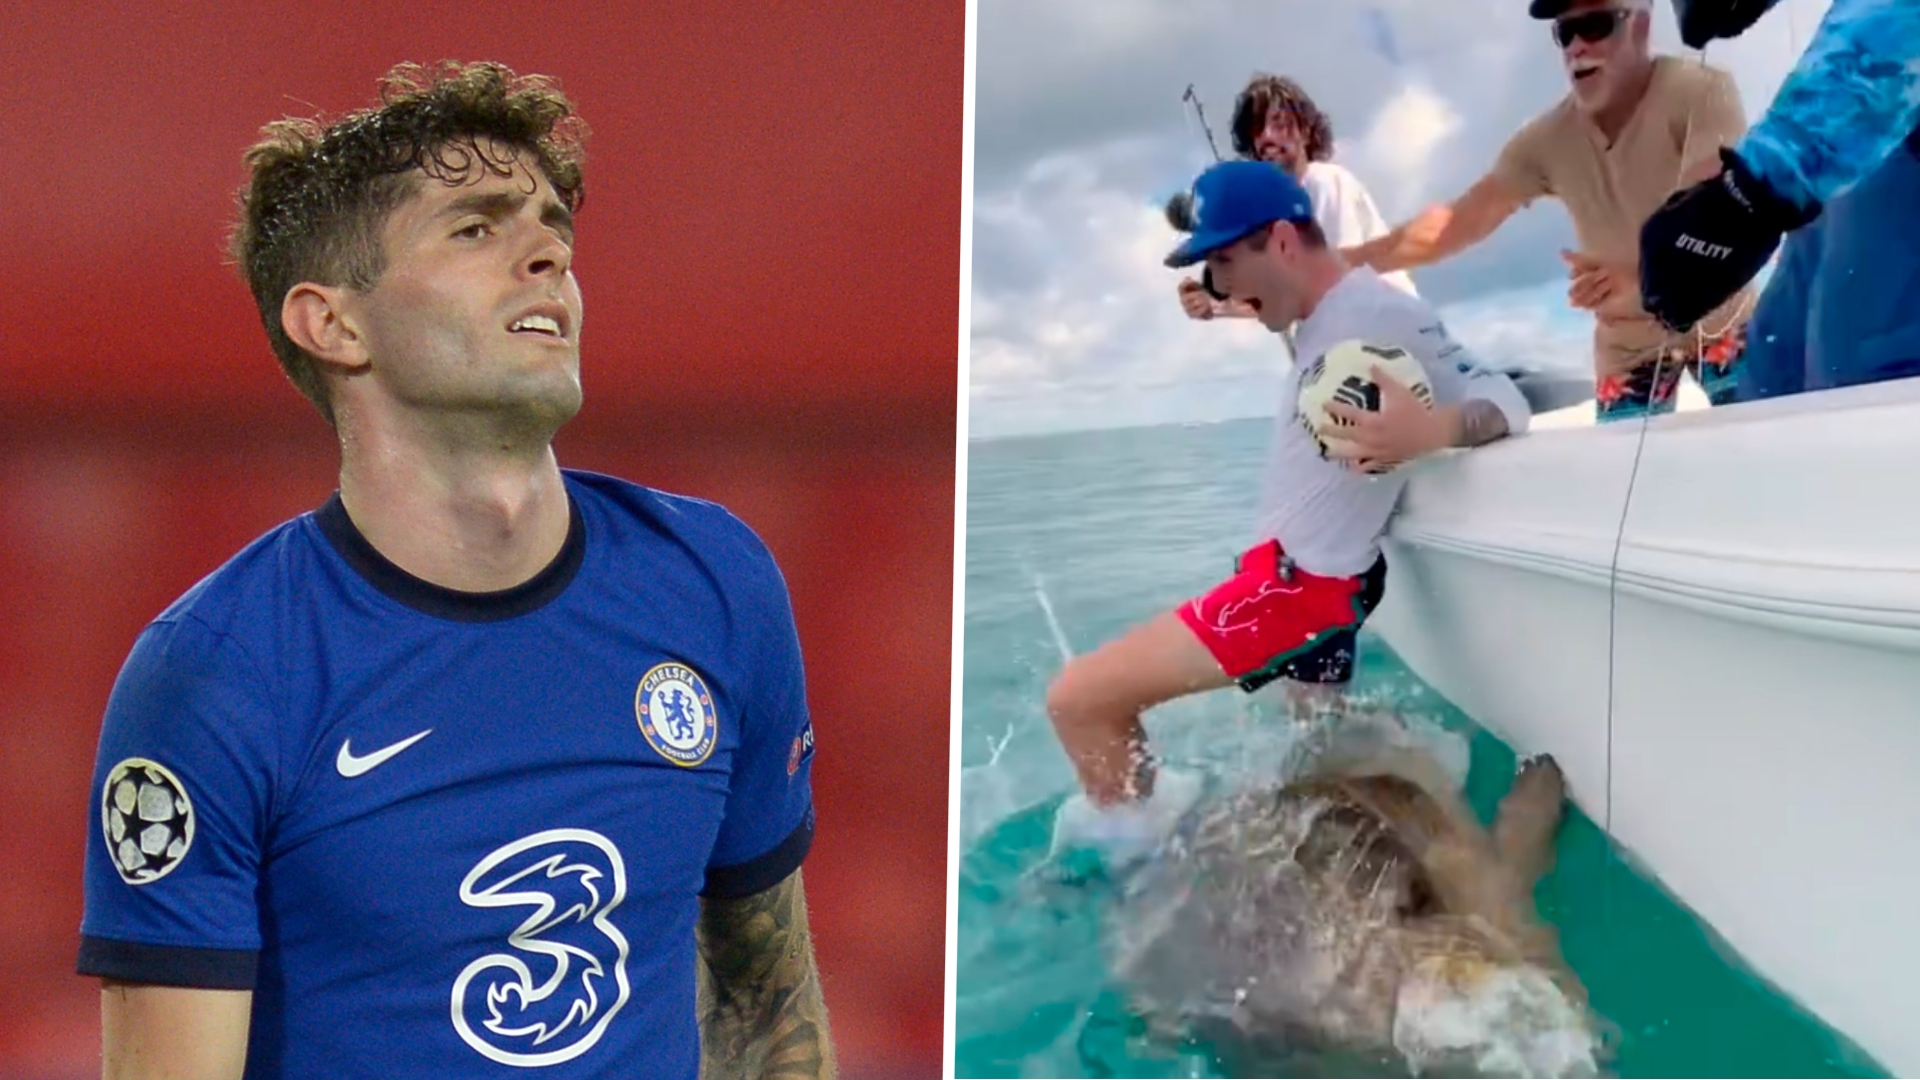 USMNT star Pulisic criticised after falling off boat on to endangered goliath grouper fish following ball juggling stunt